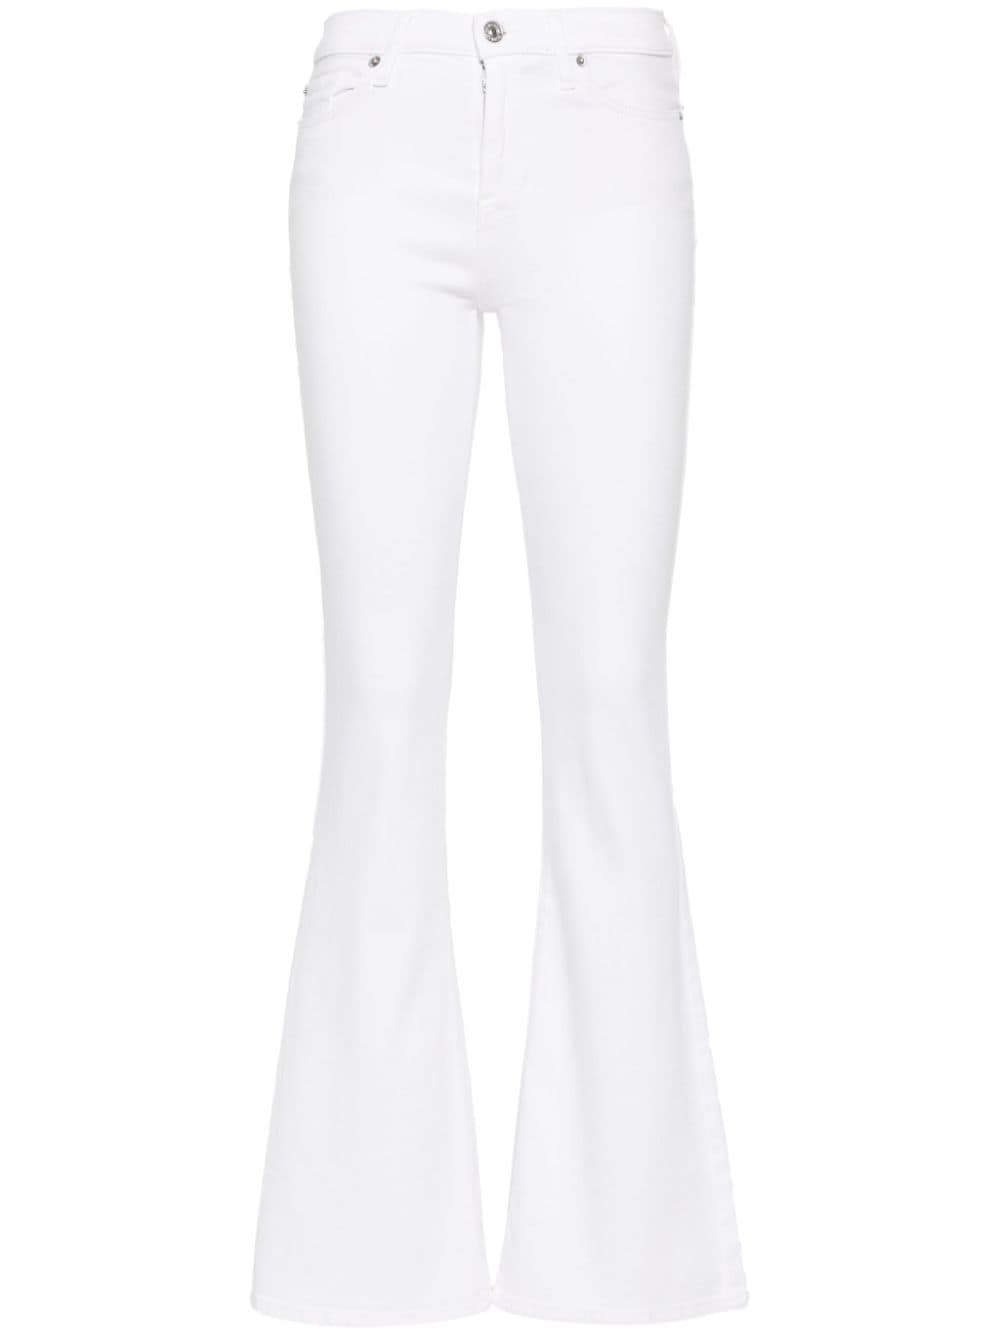 7 For All Mankind mid-rise flared jeans - White von 7 For All Mankind